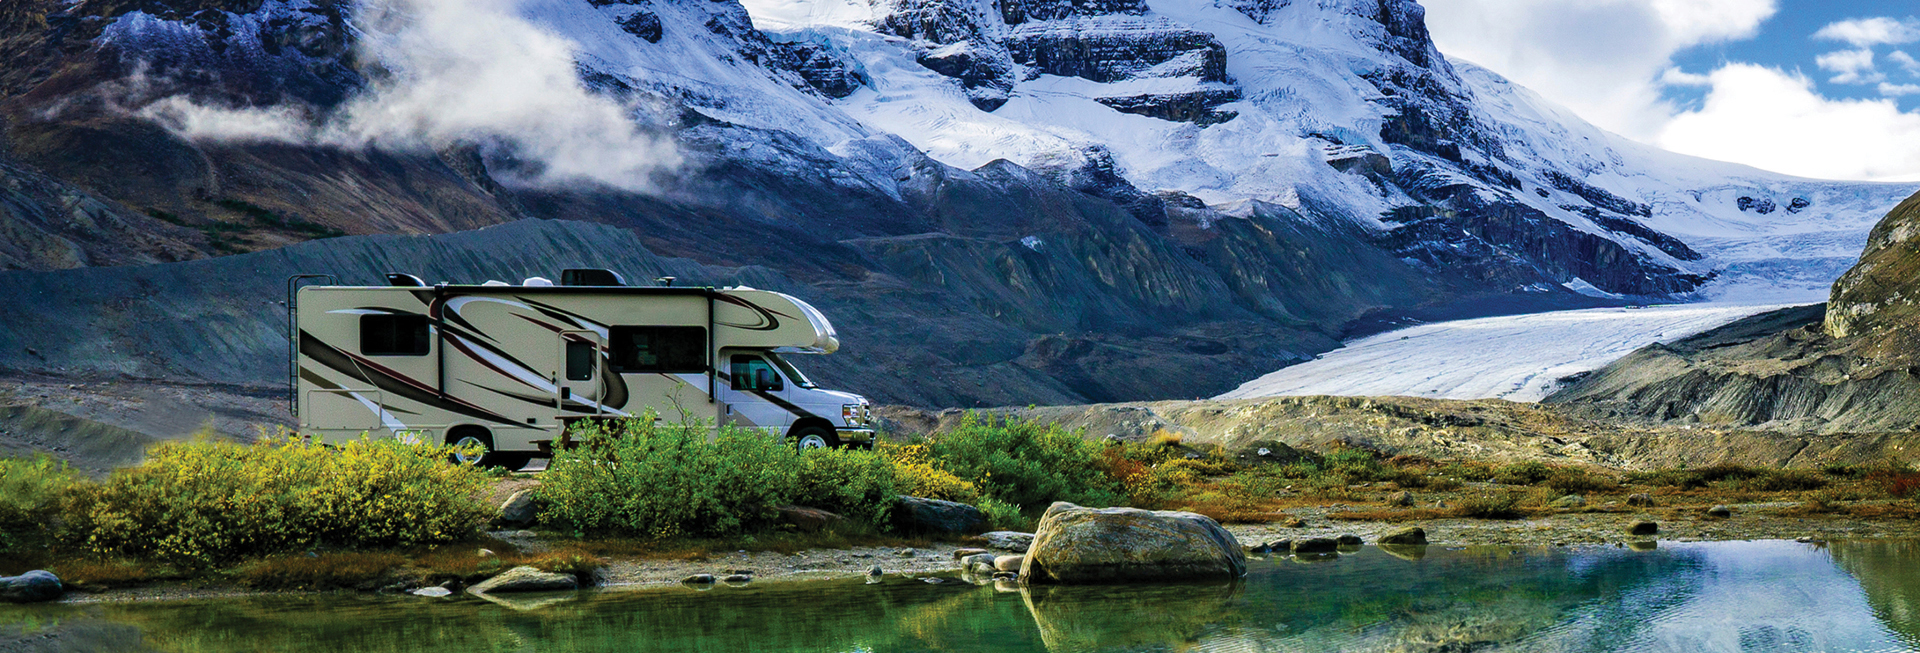 RV with snowy mountain backdrop